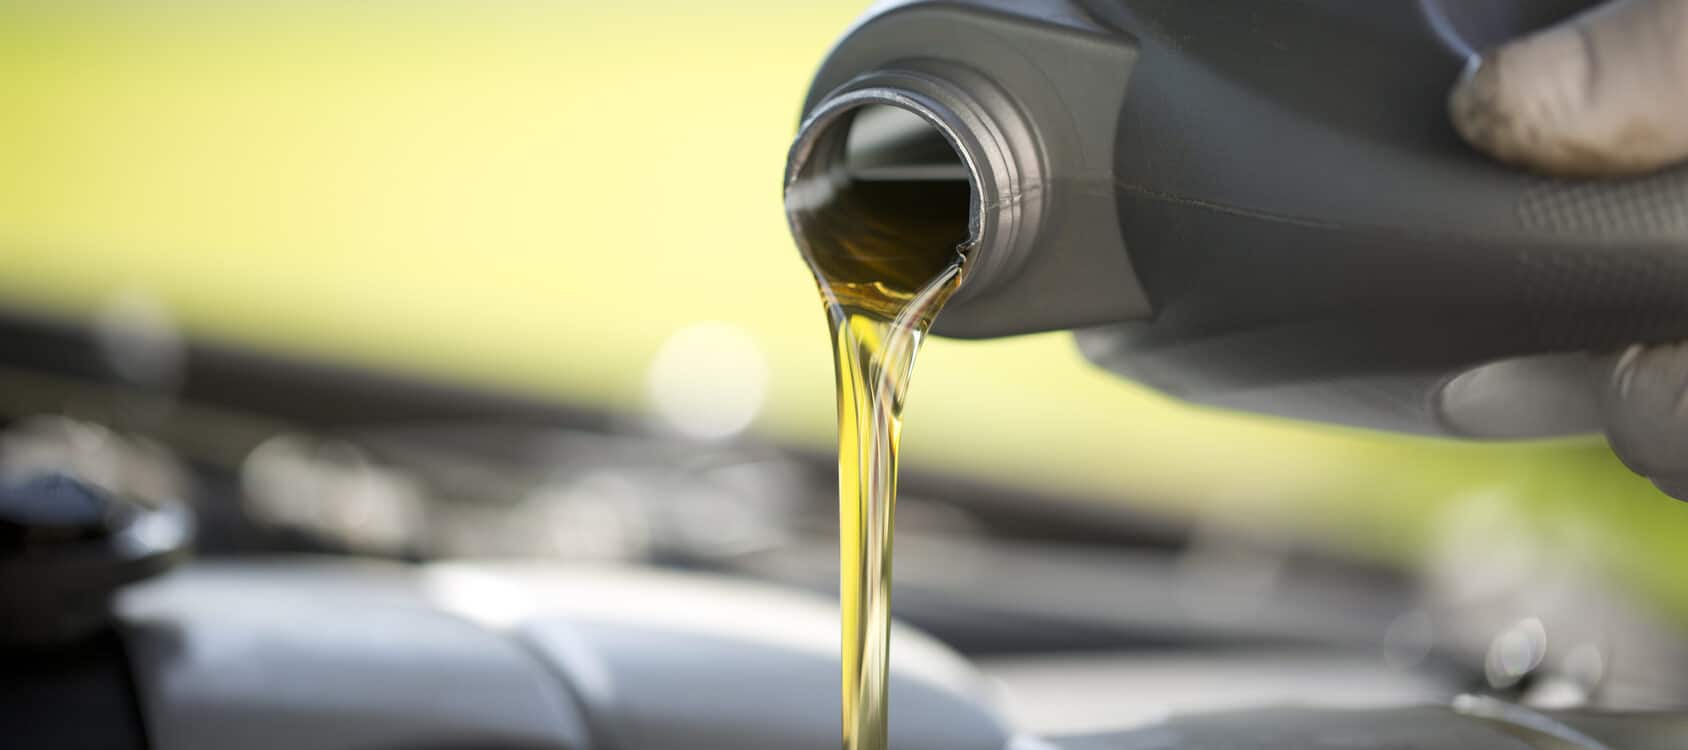 Why Do Cars Need Oil Changes